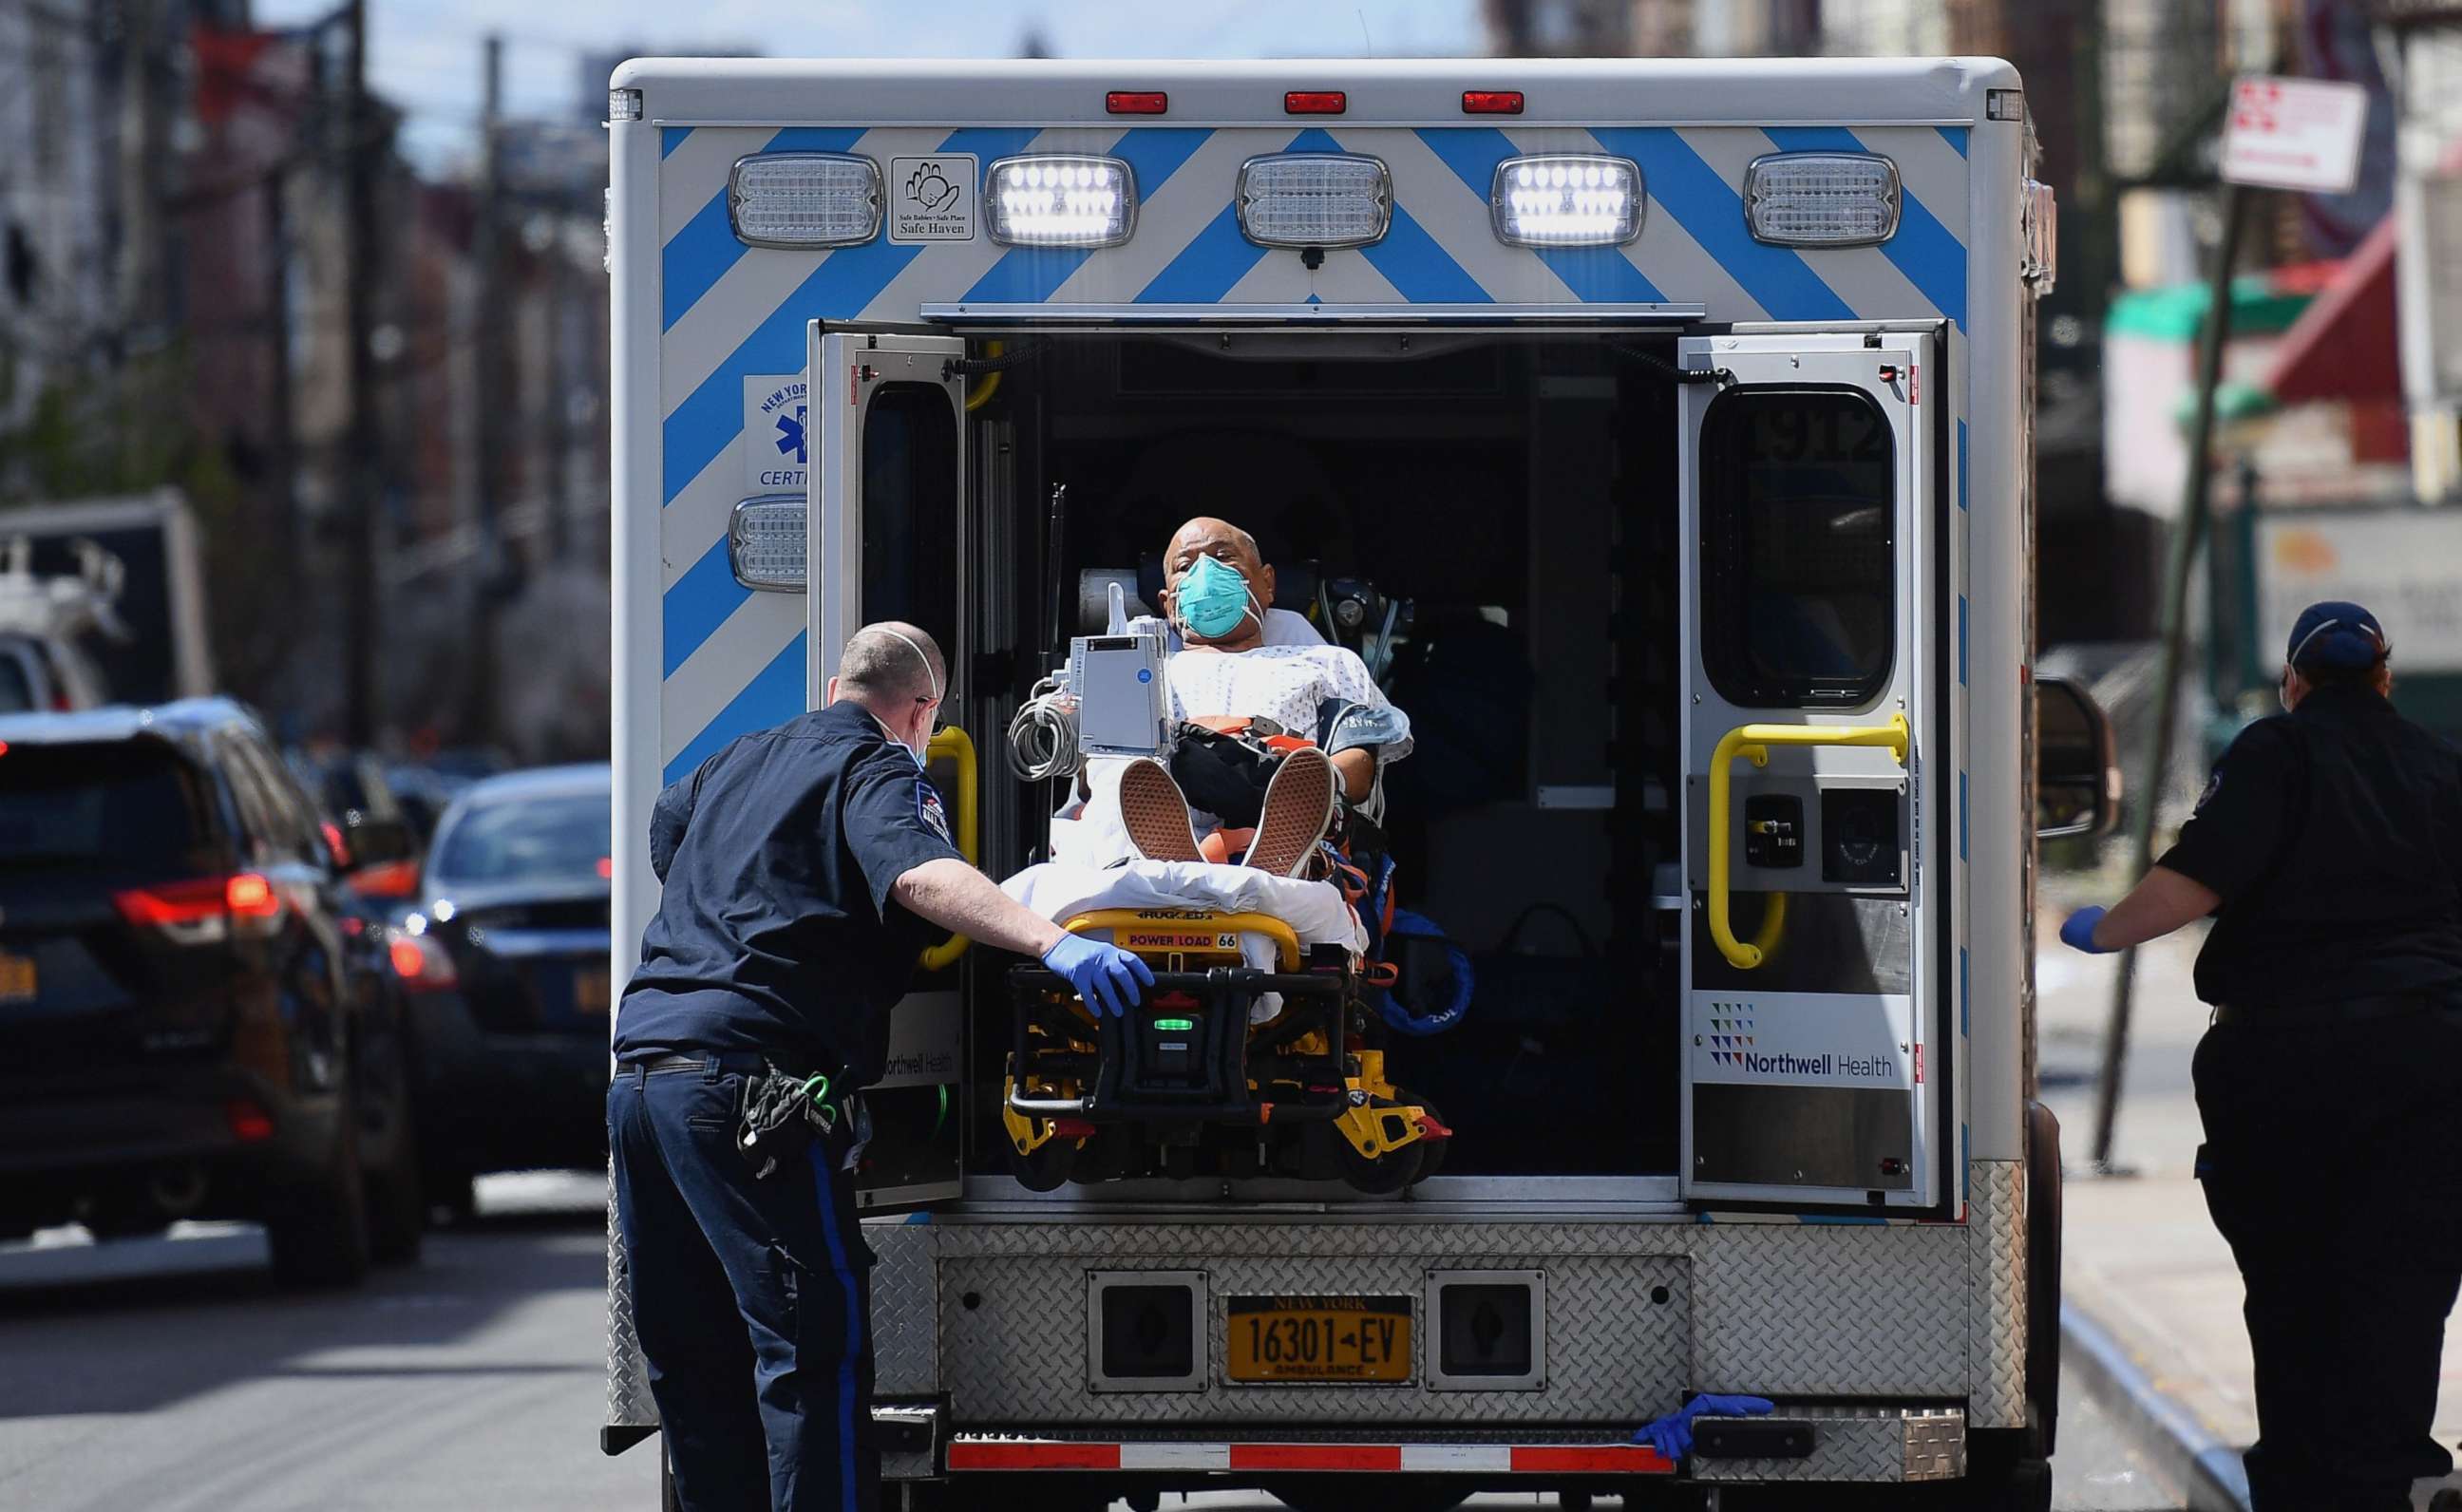 PHOTO: Paramedics transport a patient wearing a face mask to the emergency room entrance of the Wyckoff Heights Medical Center in the New York City borough of Brooklyn on April 2, 2020.